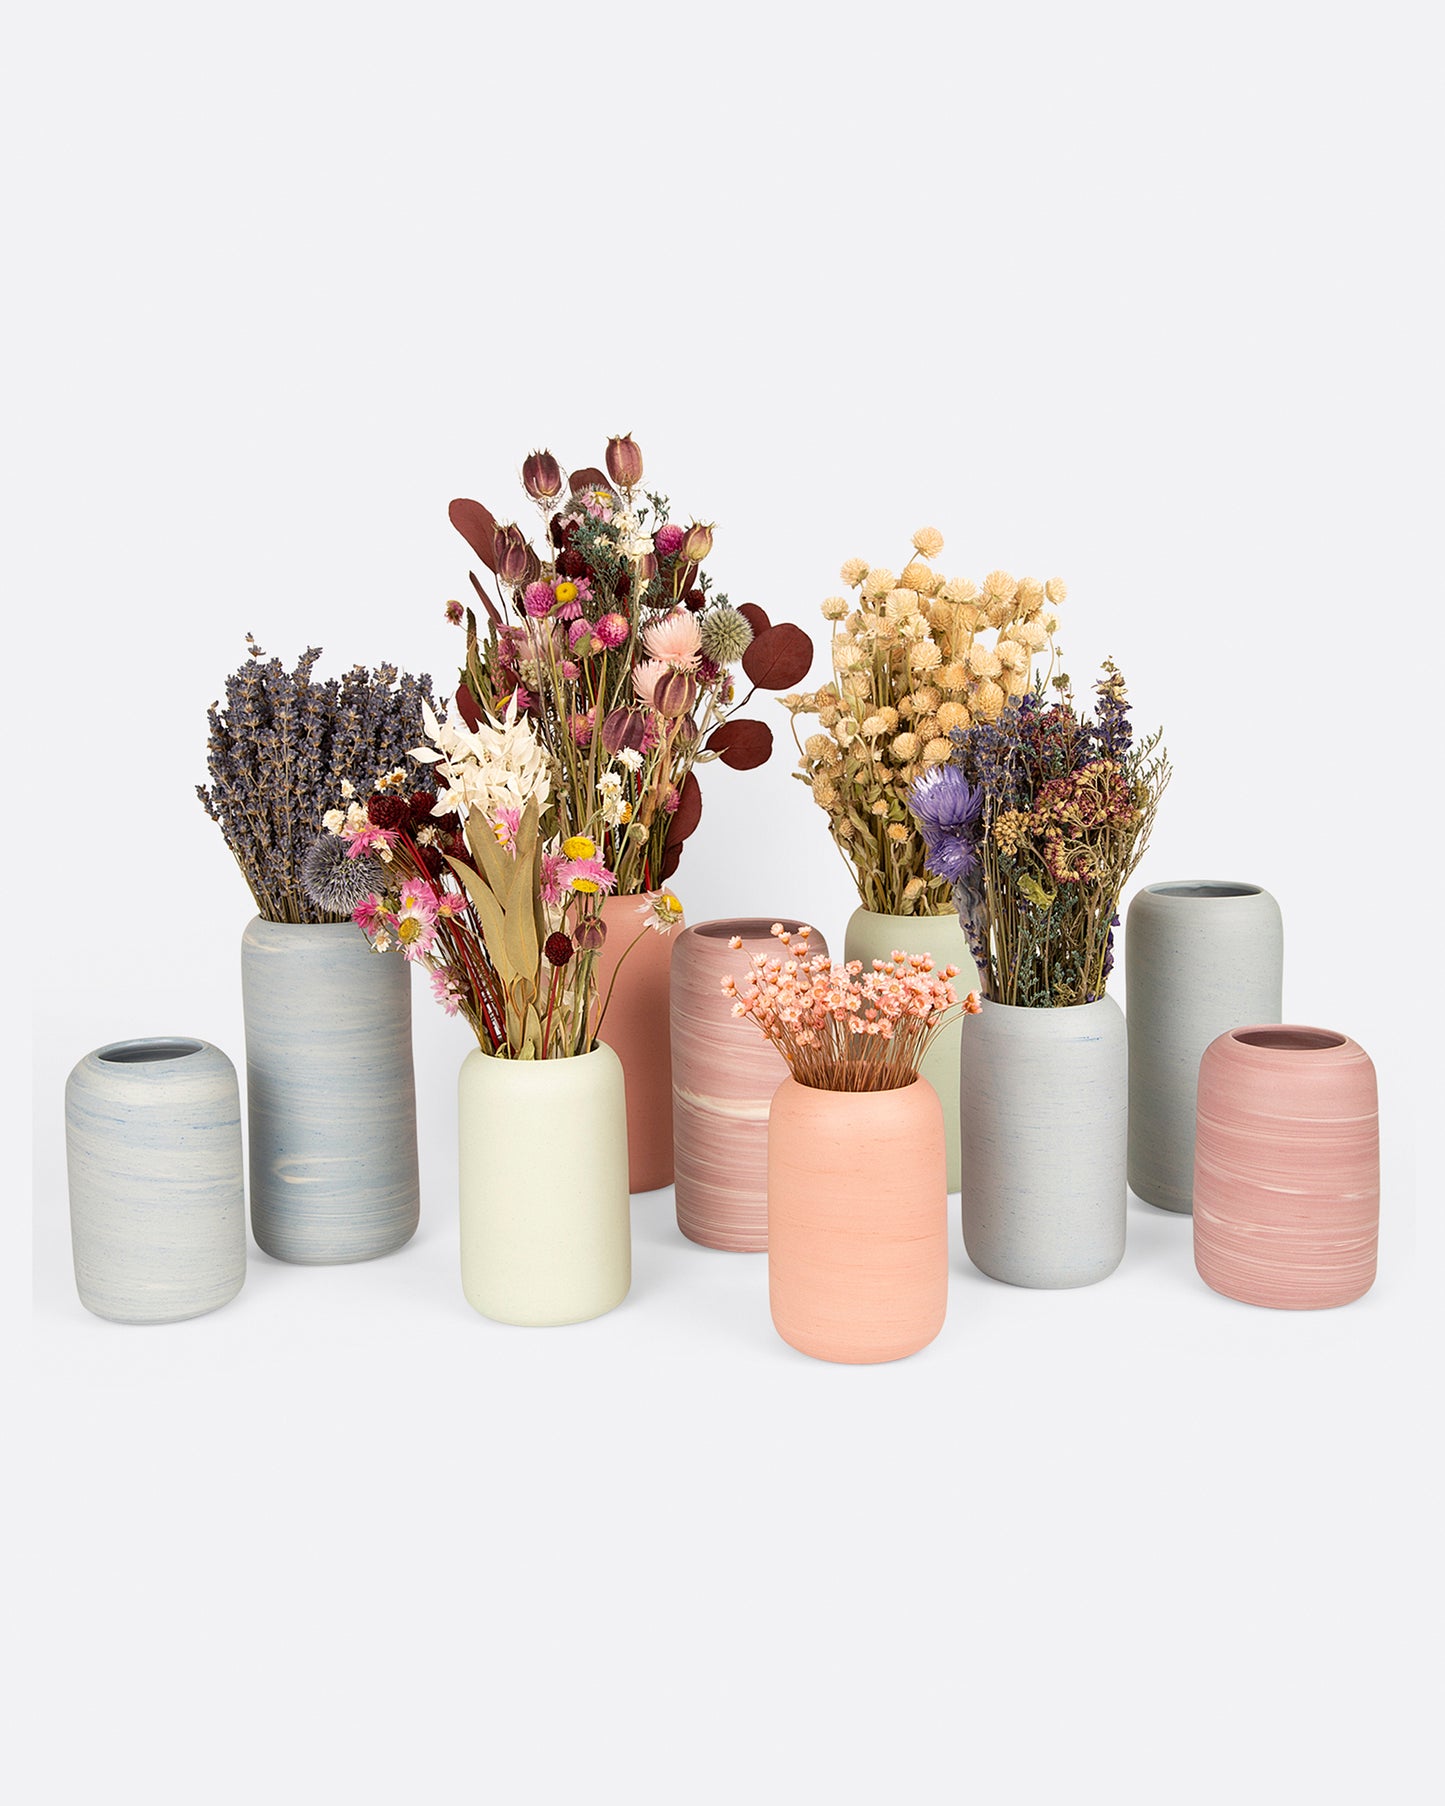 A group of all pastel colored porcelain vases, some with floral arrangments.